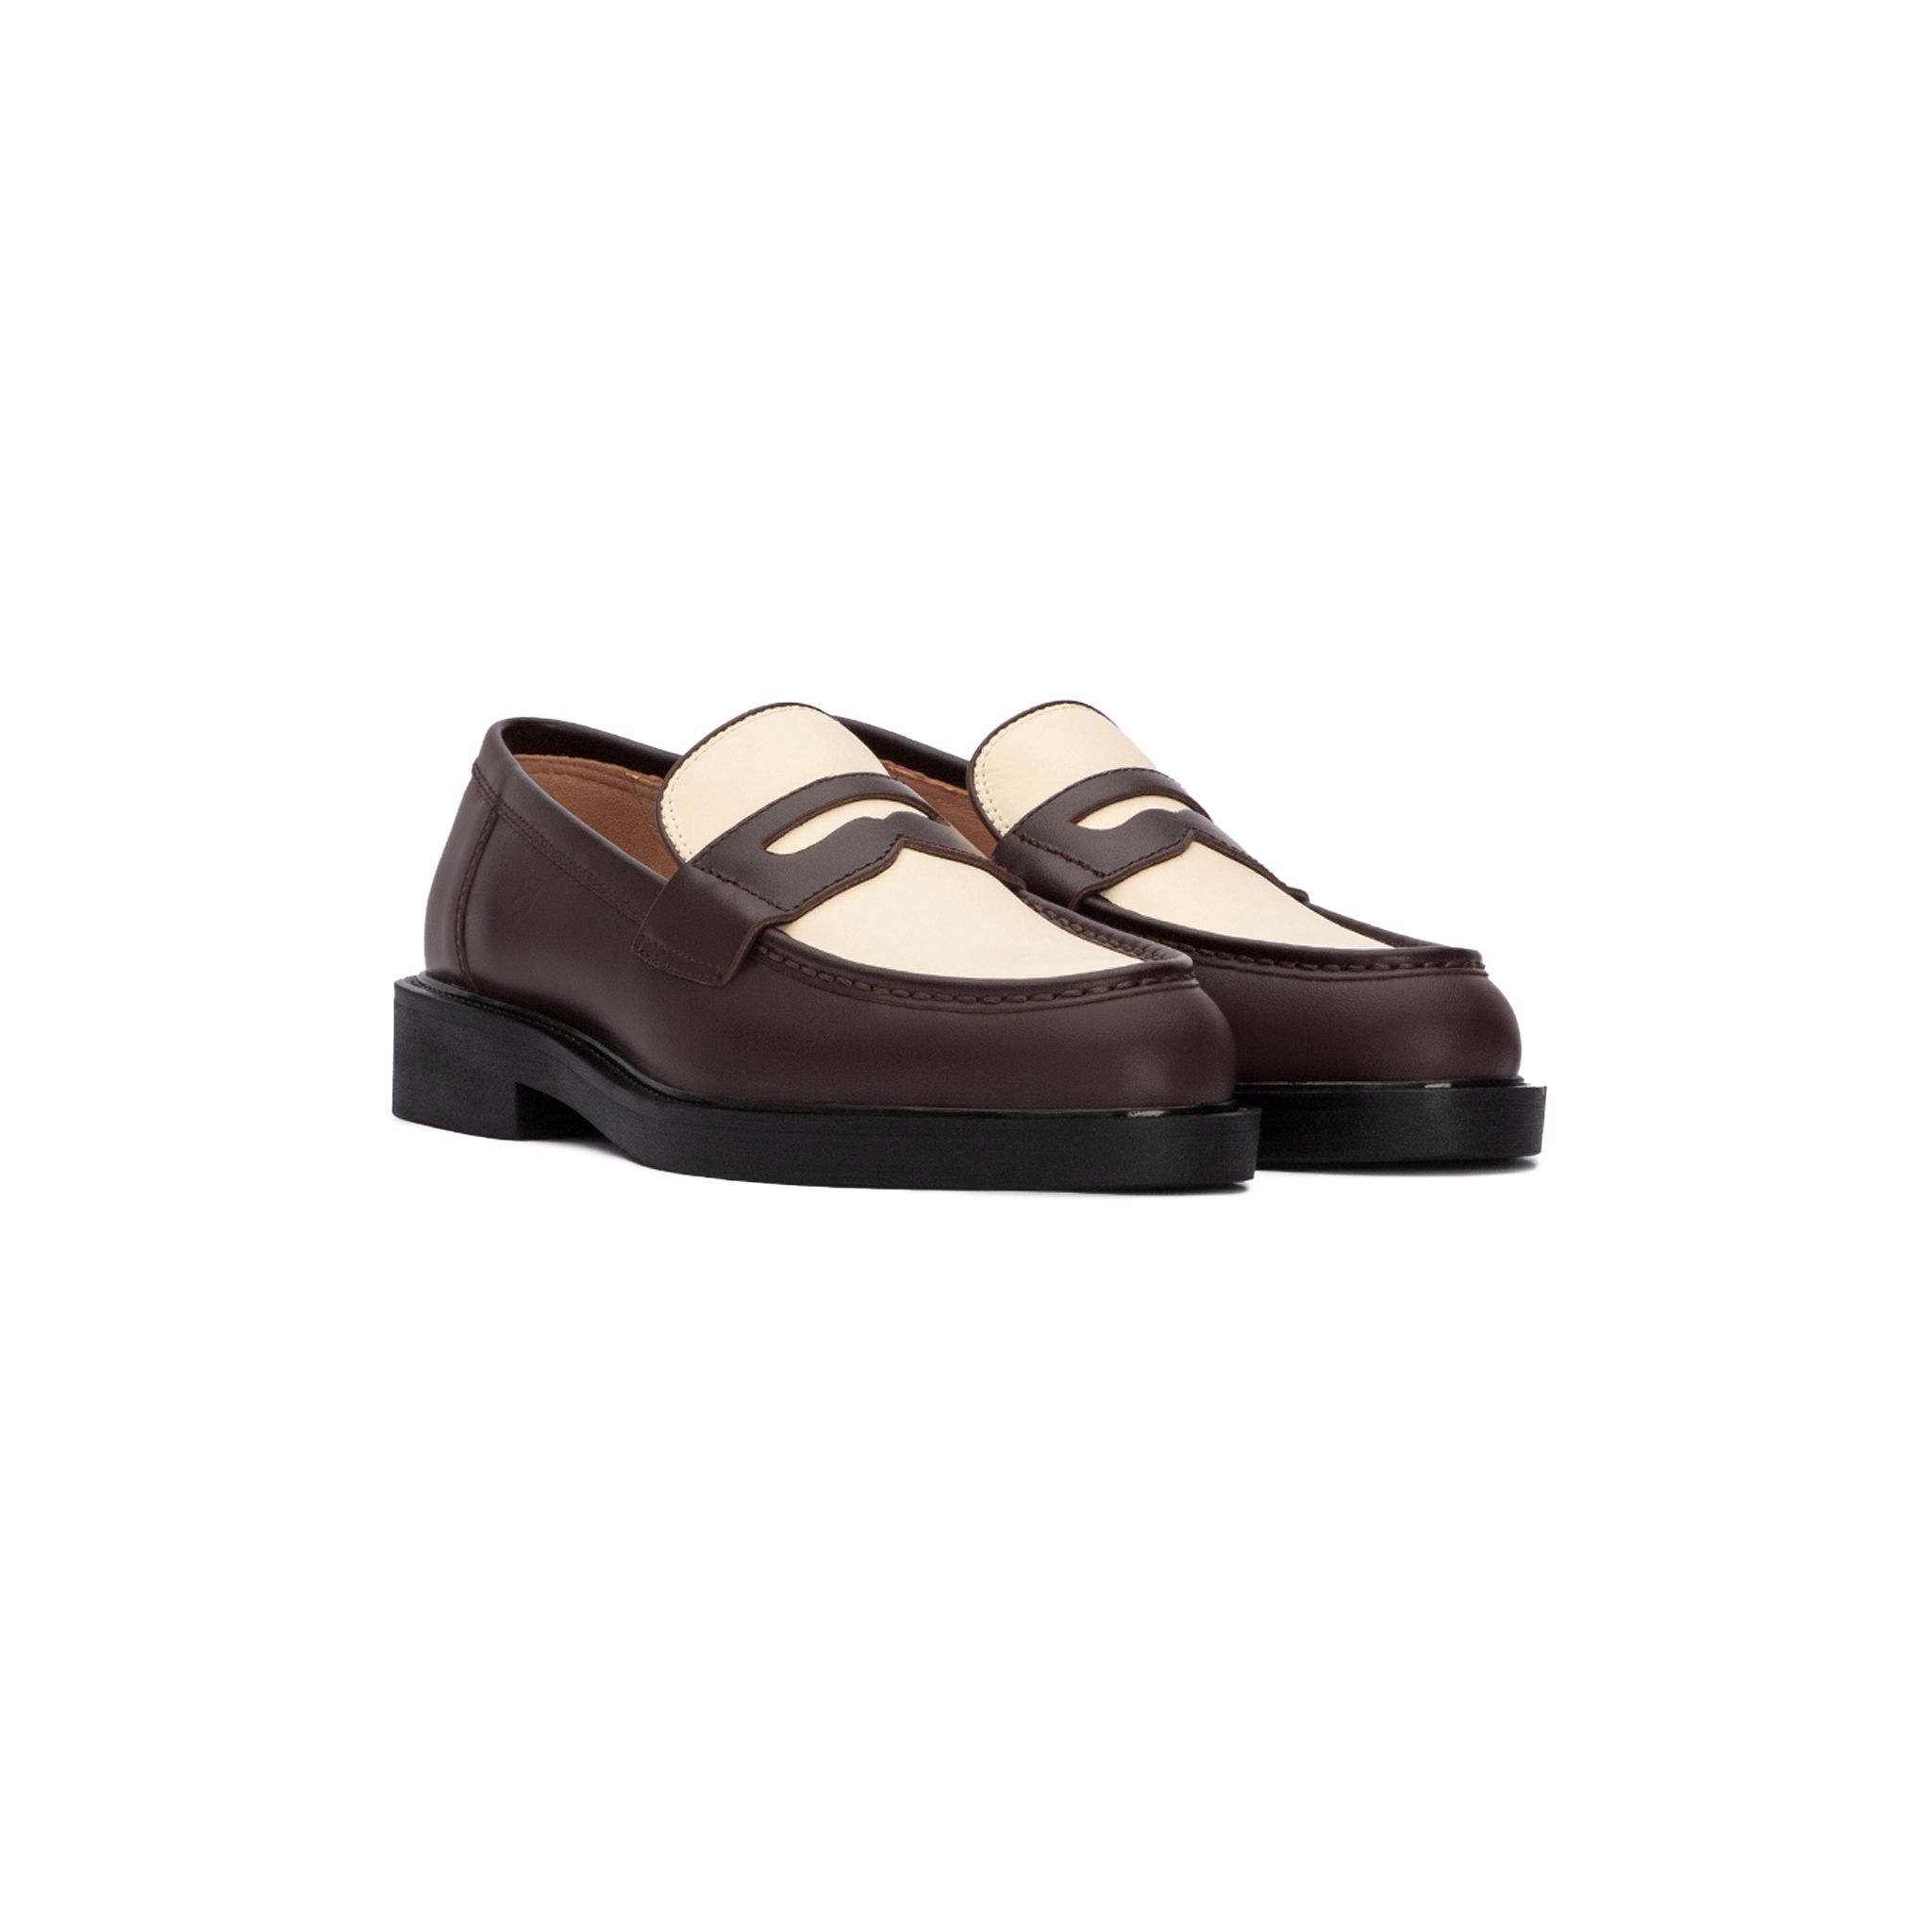  THE SEAN LADY WOLF PENNY LOAFER - BROWN & OFF-WHITE 